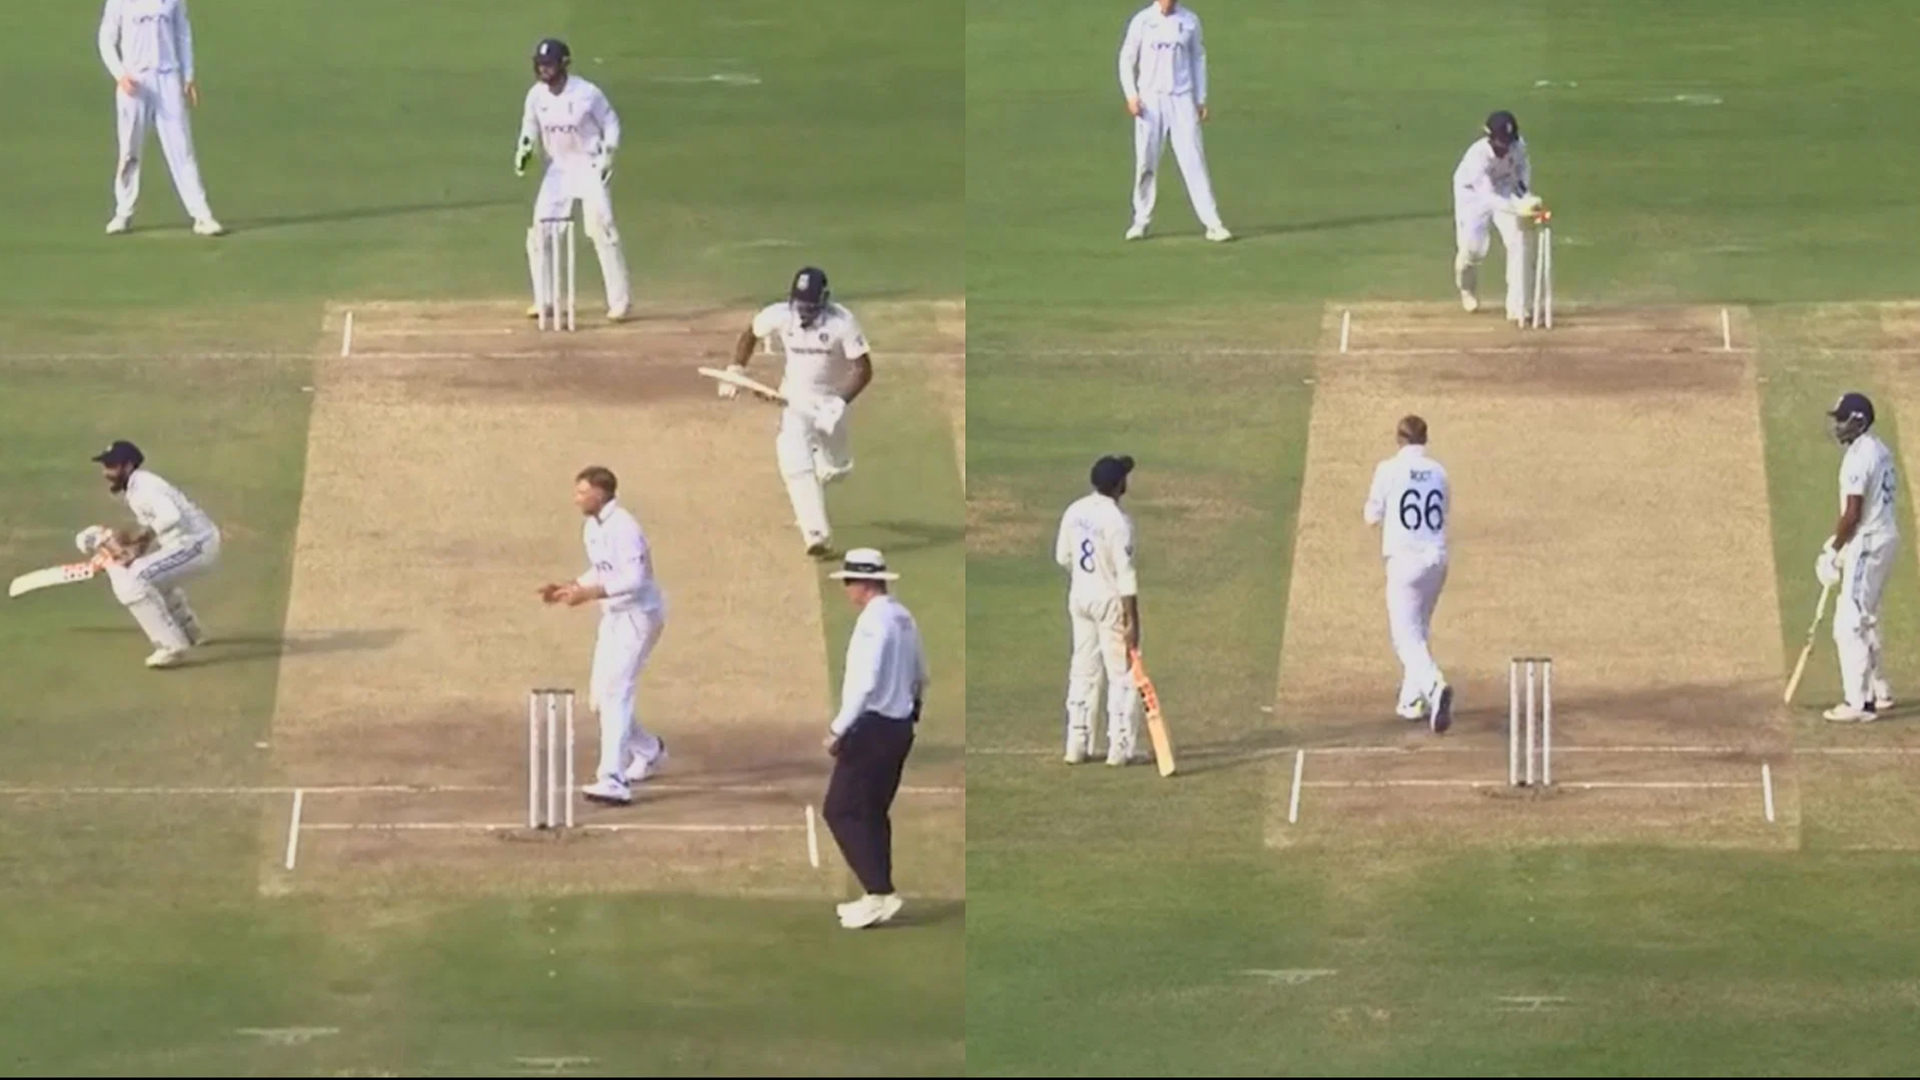 [WATCH] R Ashwin Miffed After Horrible Run-Out With Ravindra Jadeja